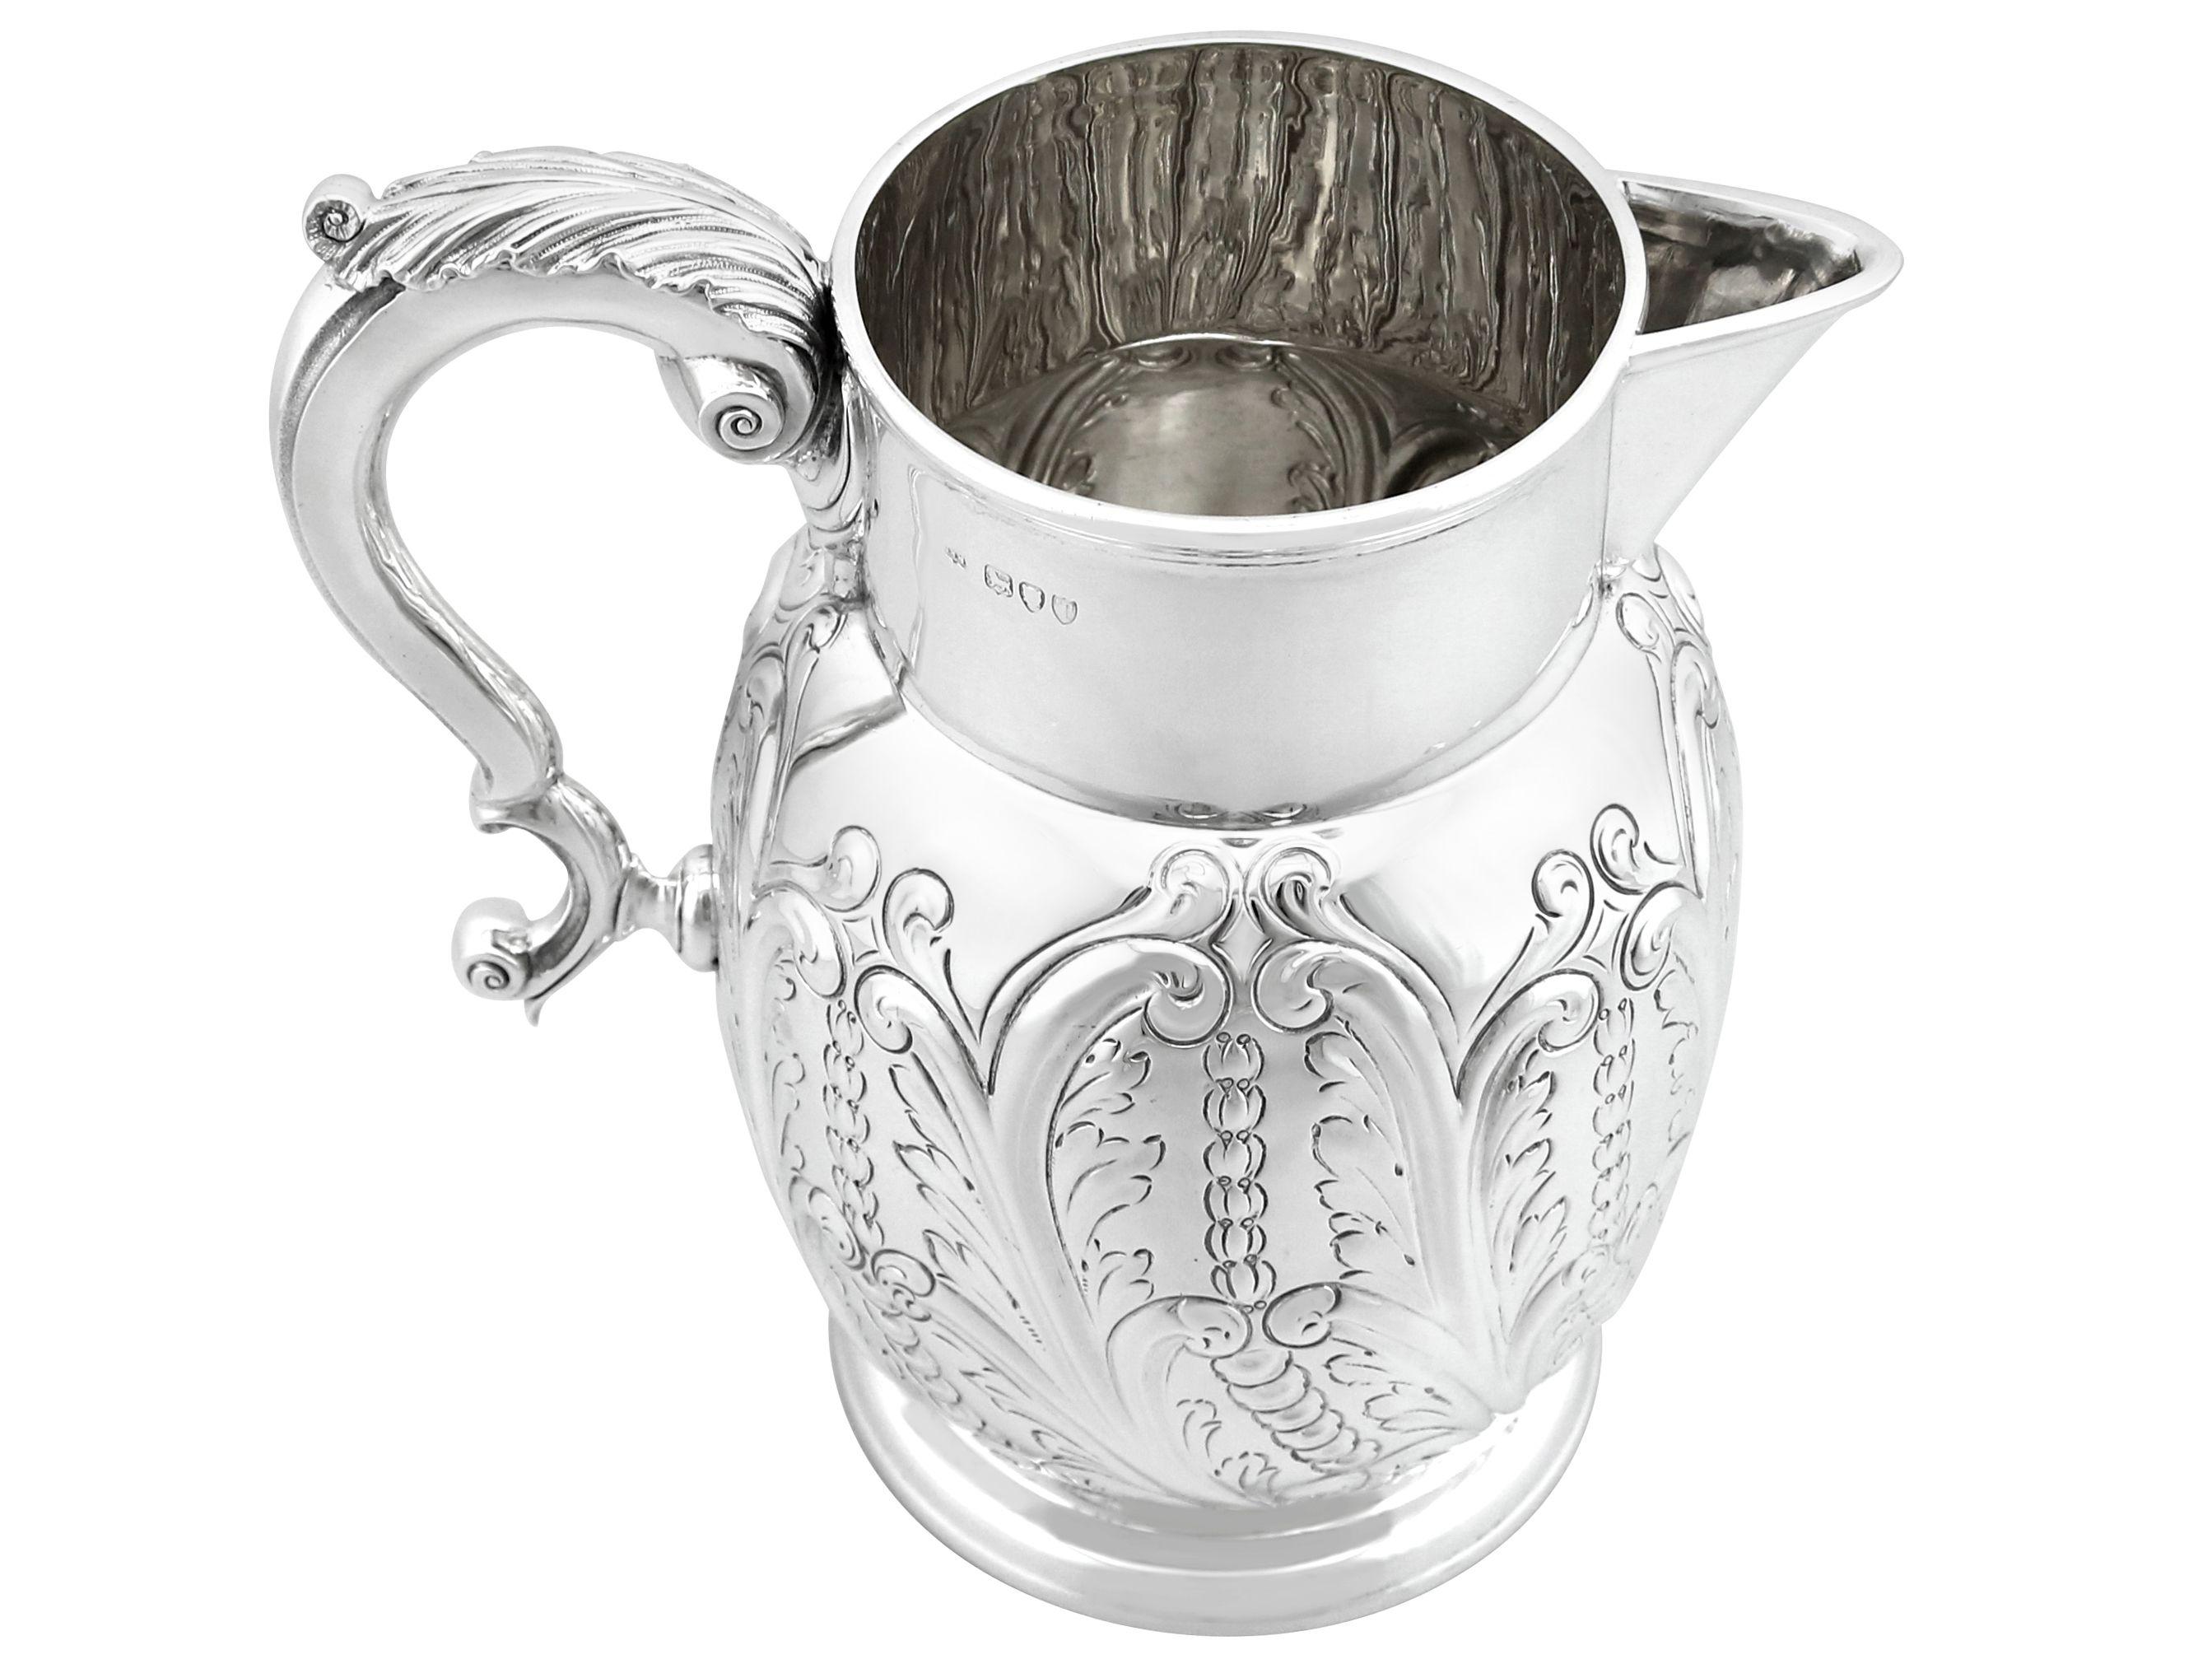 An exceptional, fine and impressive, large antique Victorian English sterling silver beer/water/cordial jug; part of our dining silverware collection

This exceptional antique English antique Victorian sterling silver water jug has a circular